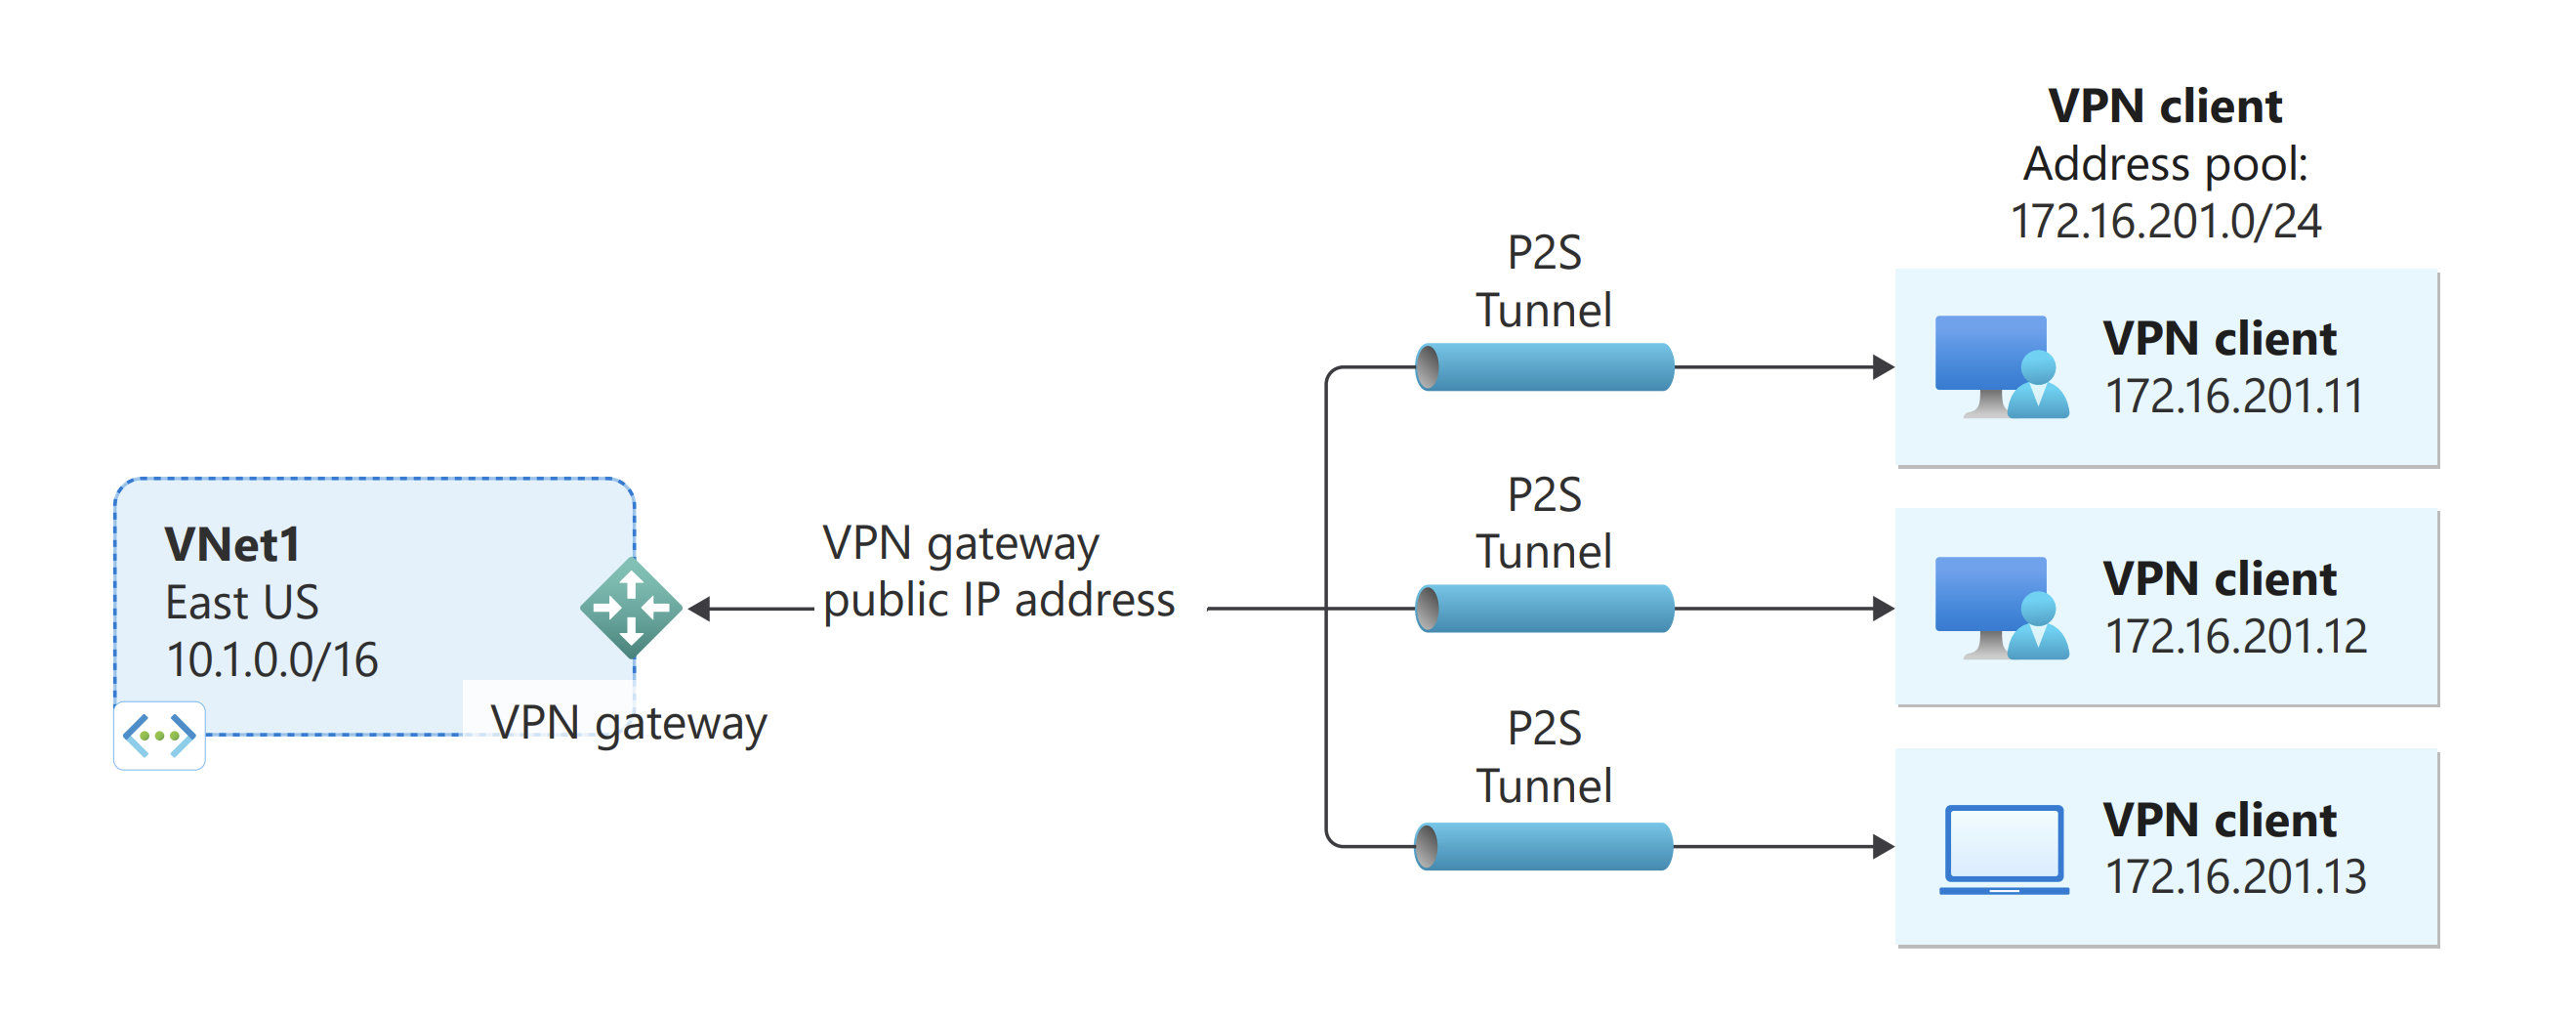 Launch the VPN application and connect to a server location.
Test your network connection with the VPN enabled.